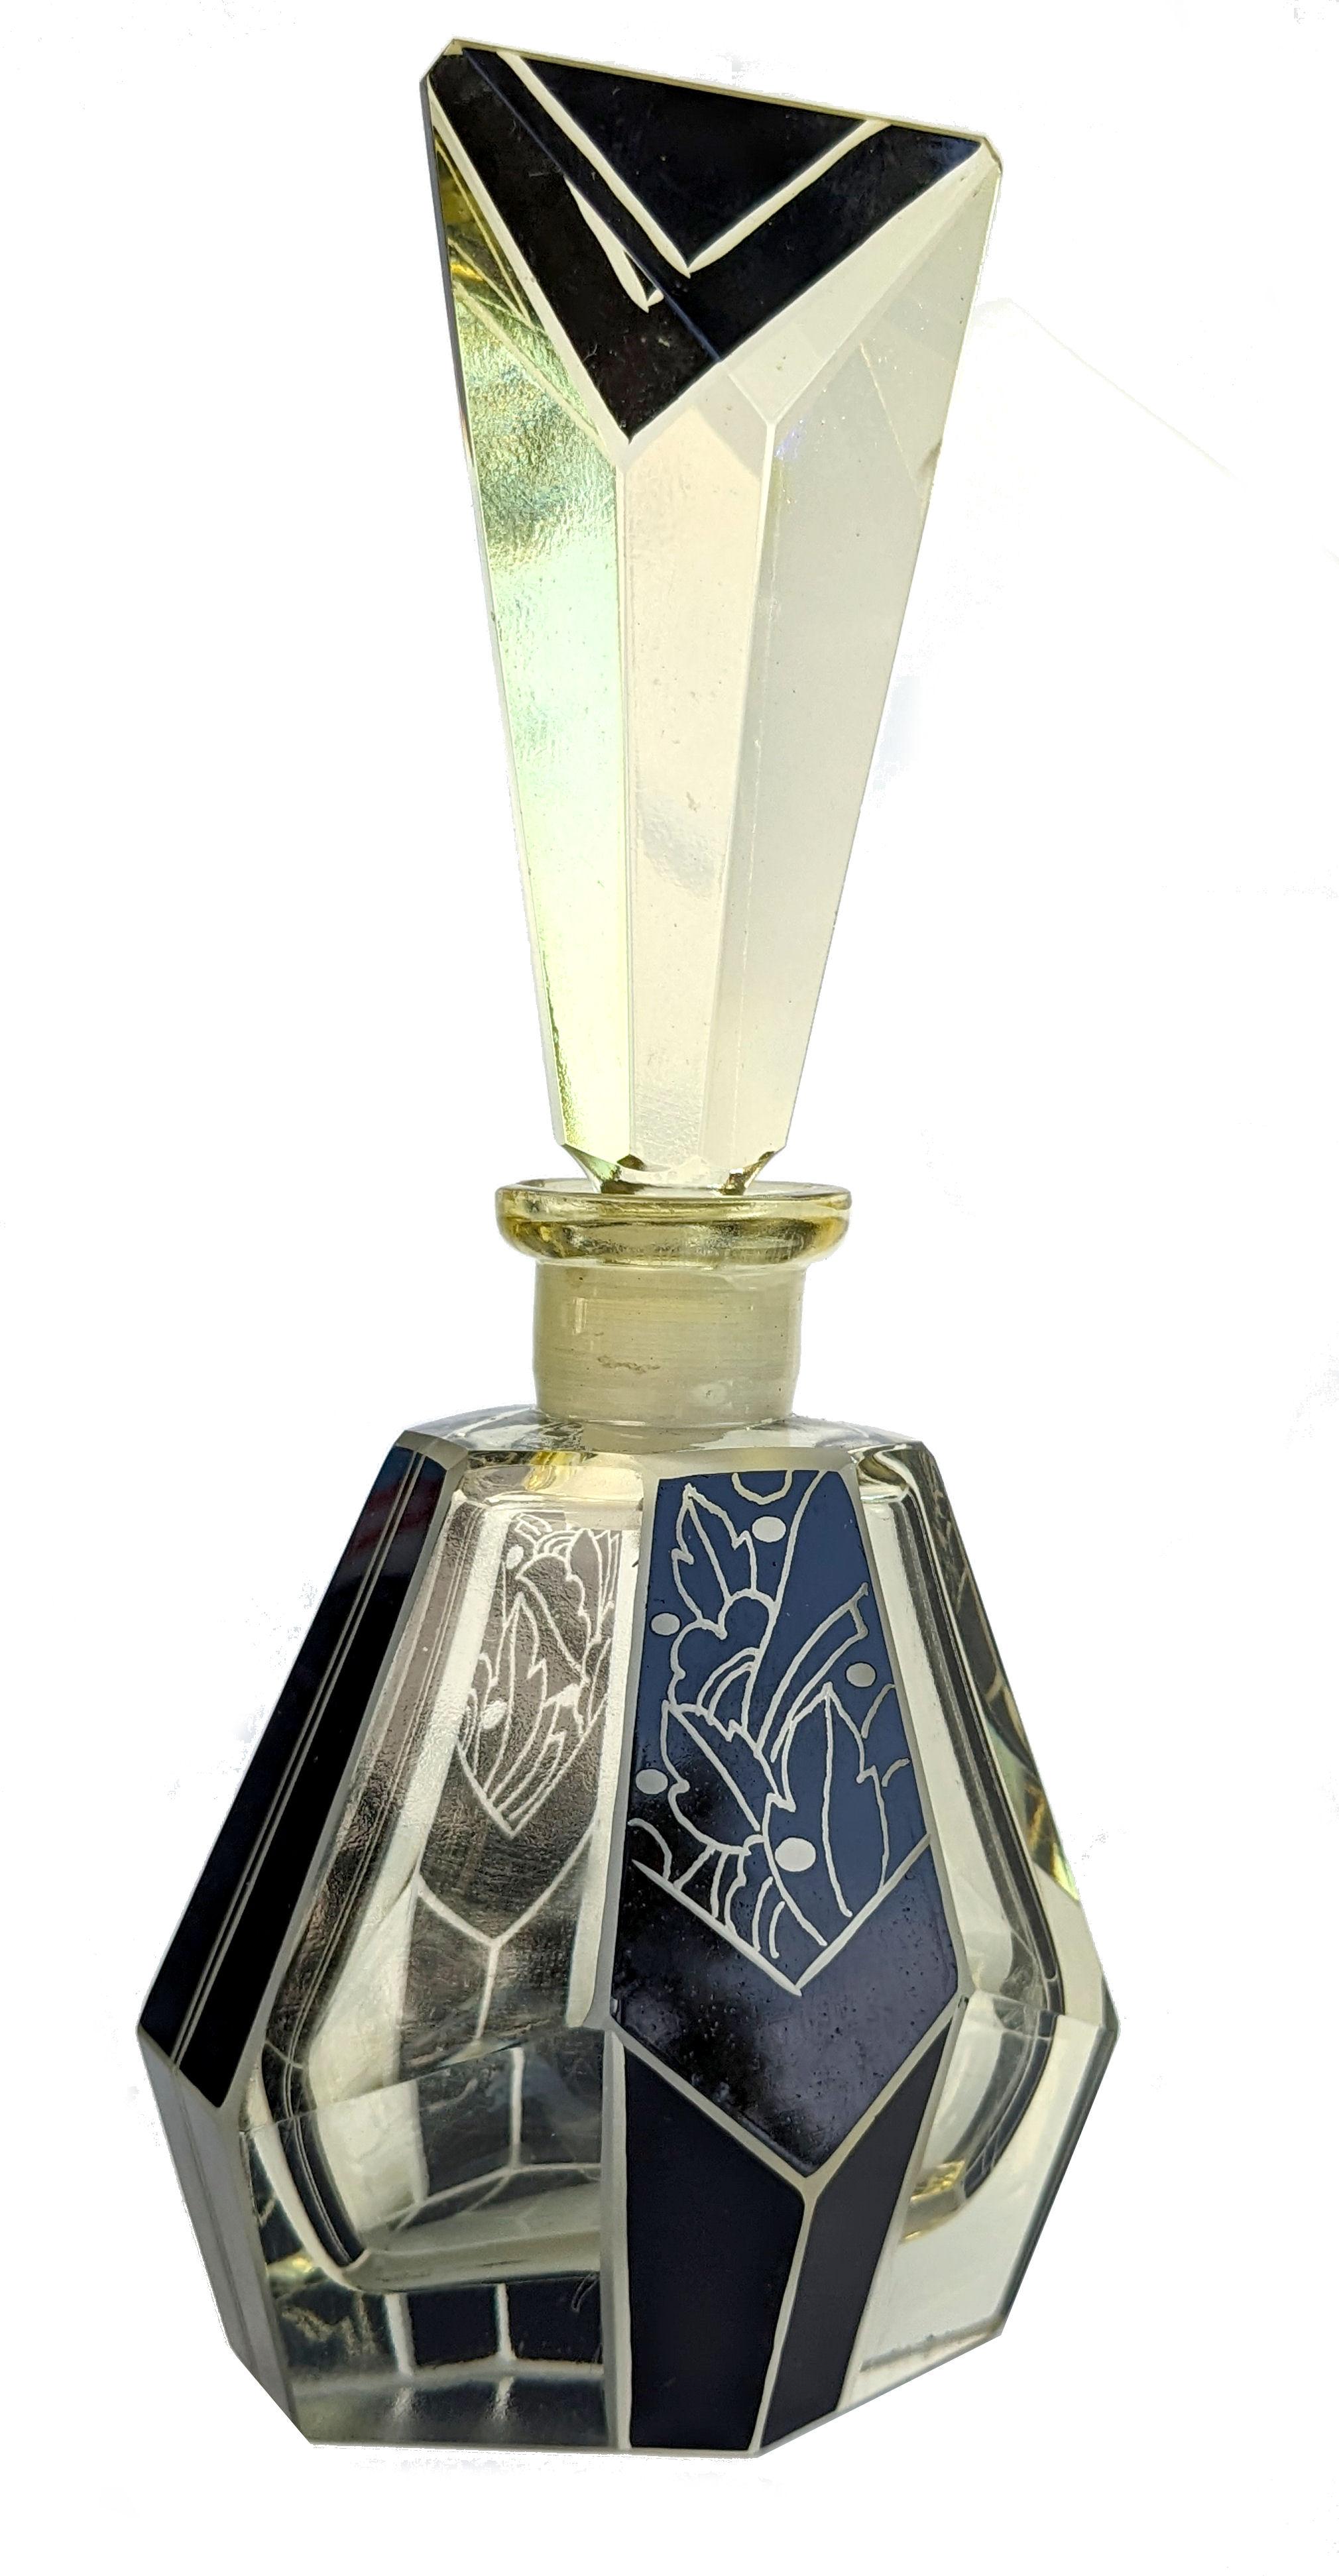 Art Deco large cut glass perfume scent bottle, dating to the 1930's and originating from Czech republic. In lemon yellow cut glass with jet black enamelled geometric design. Glass cut glass stopper. Manufactured in Czech republic in the 1930s this